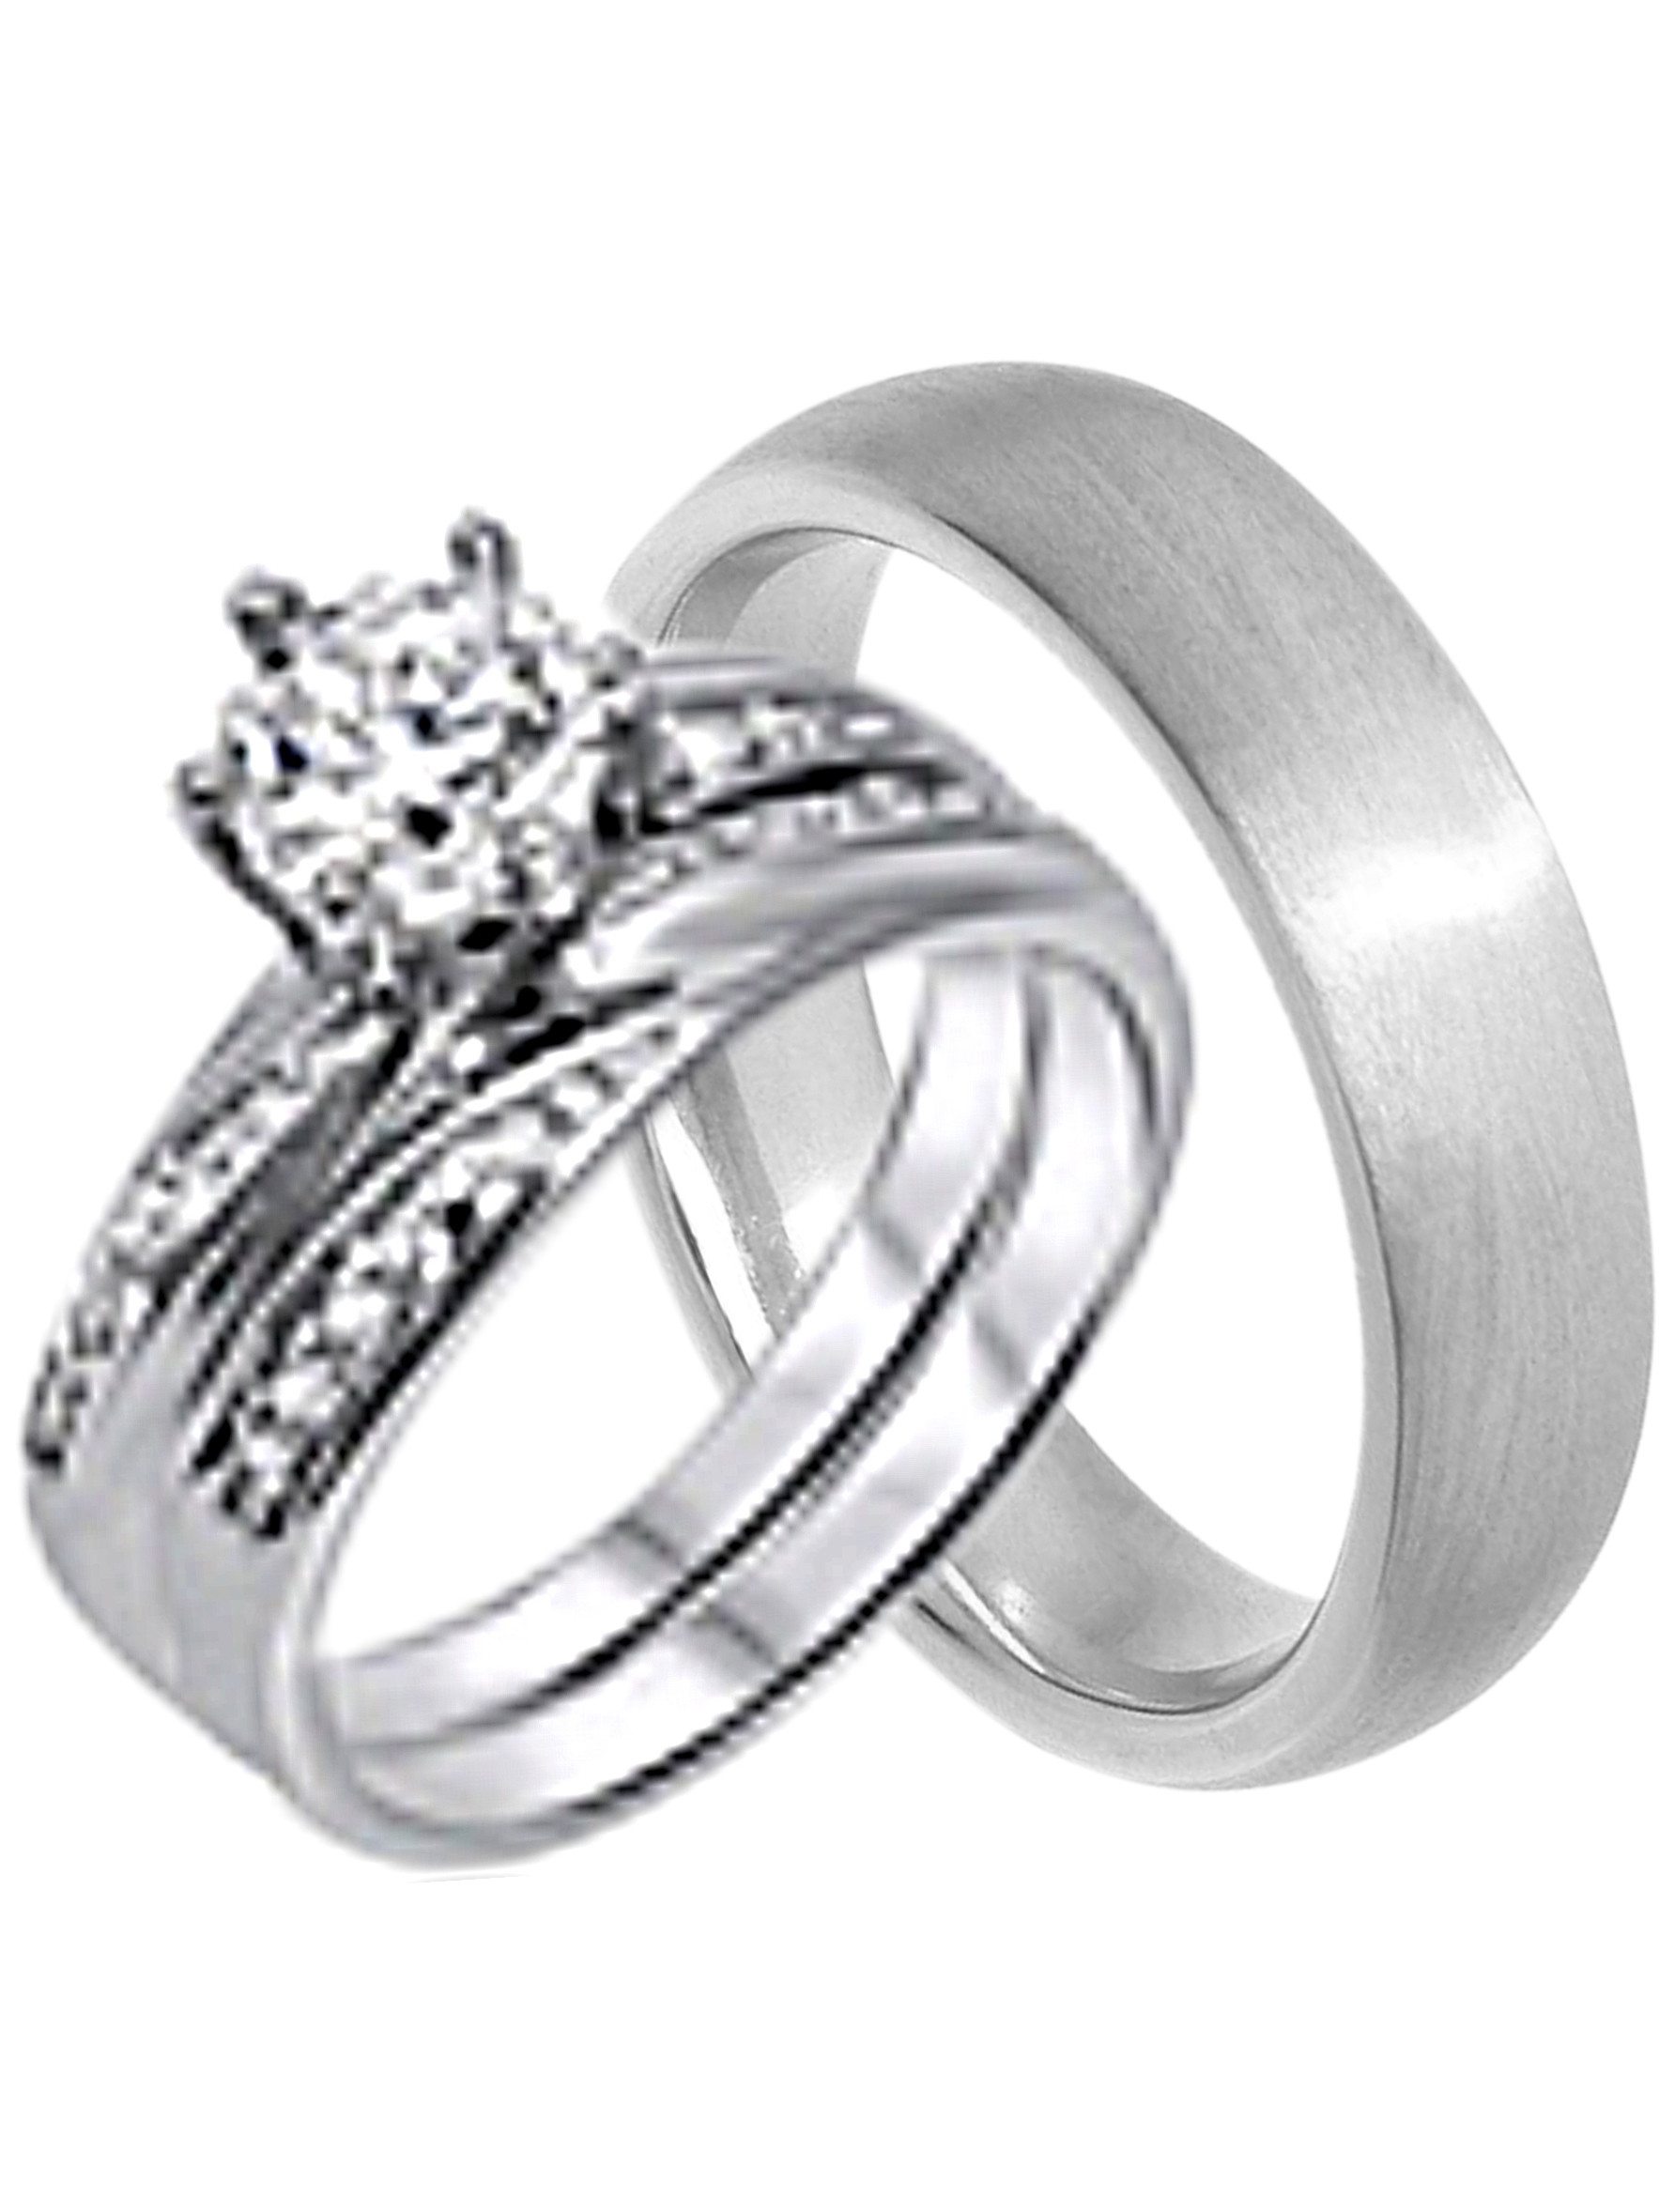 Cheap Wedding Rings For Her And Him
 His and Hers Wedding Ring Set Cheap Wedding Bands for Him